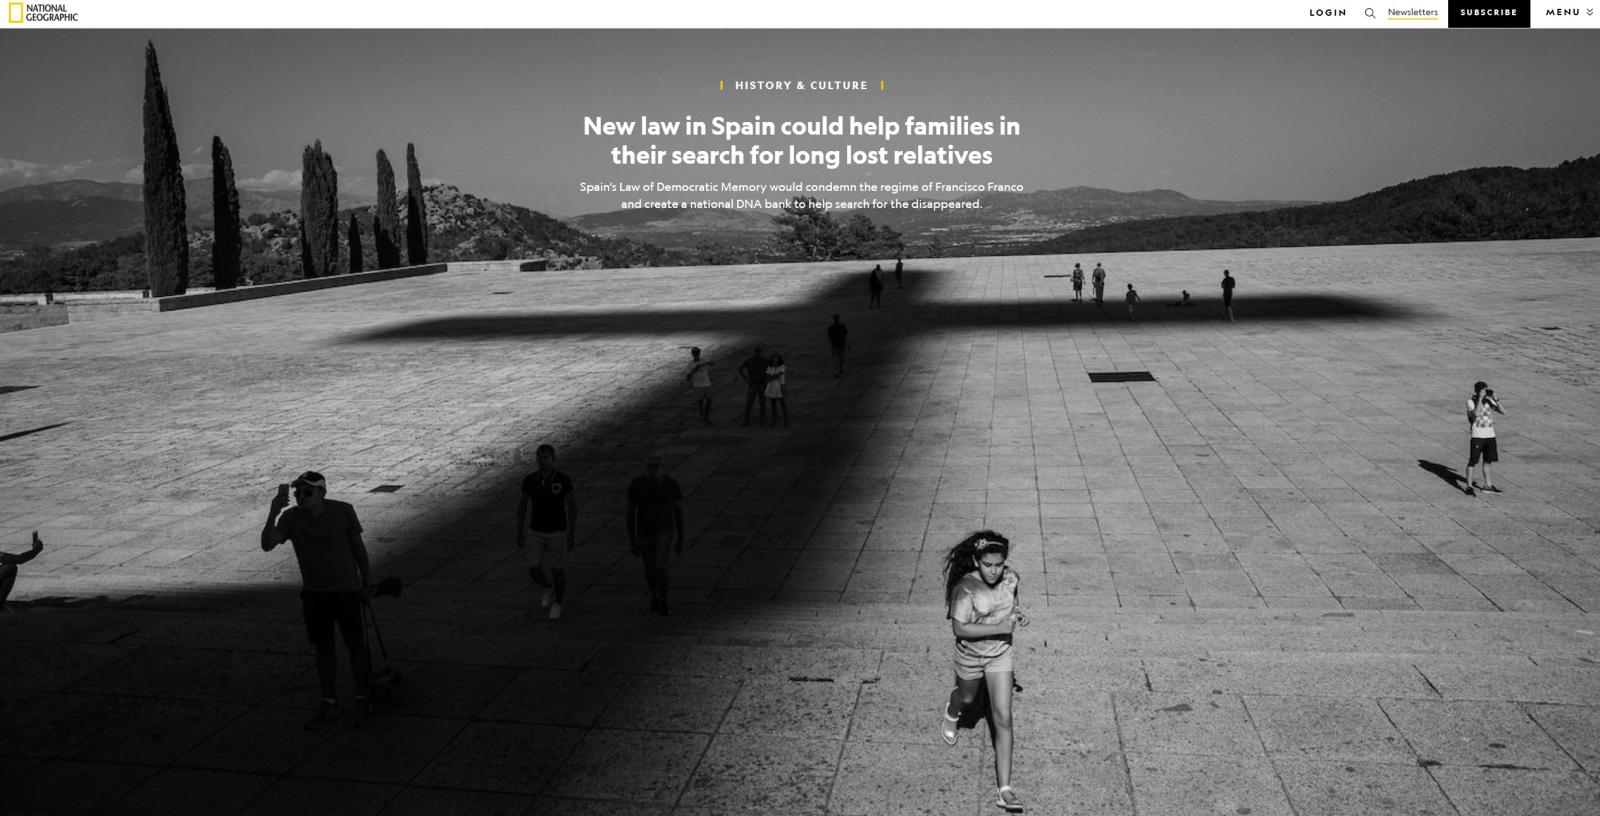 Thumbnail of NATGEO:  New law in Spain could help families in their search for long lost relatives?